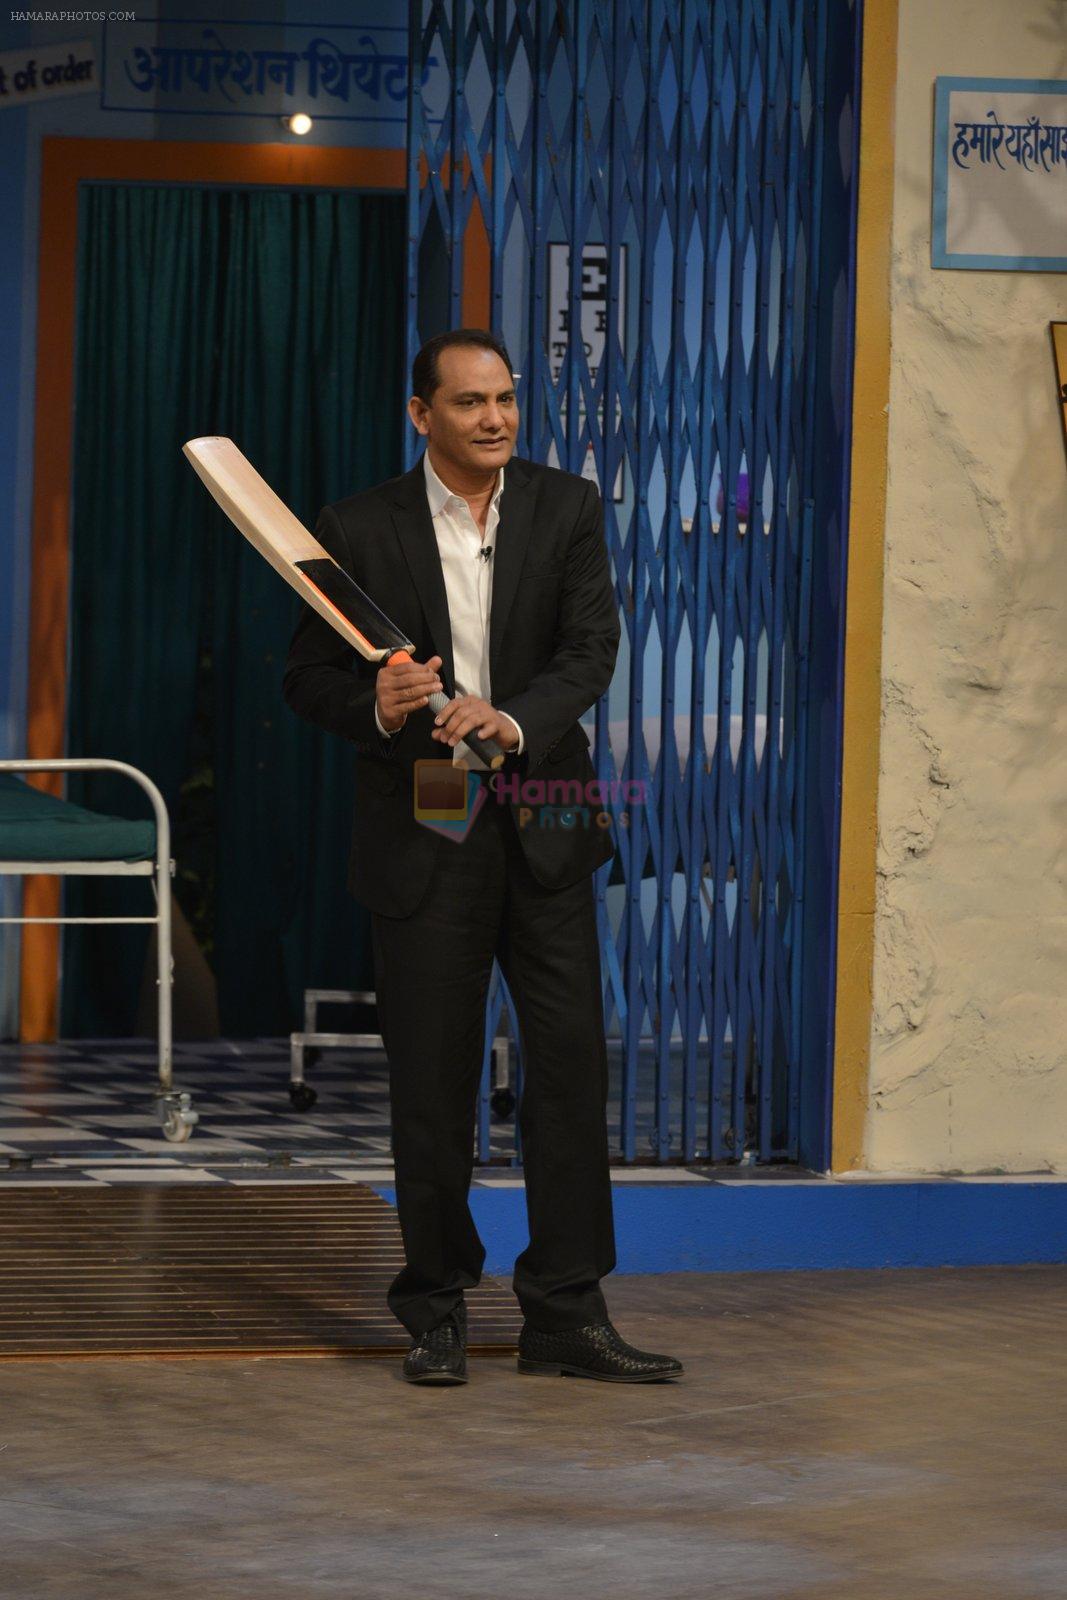 Mohammad Azharuddin at the promotion of Azhar on location of The Kapil Sharma Show on 22nd April 2016